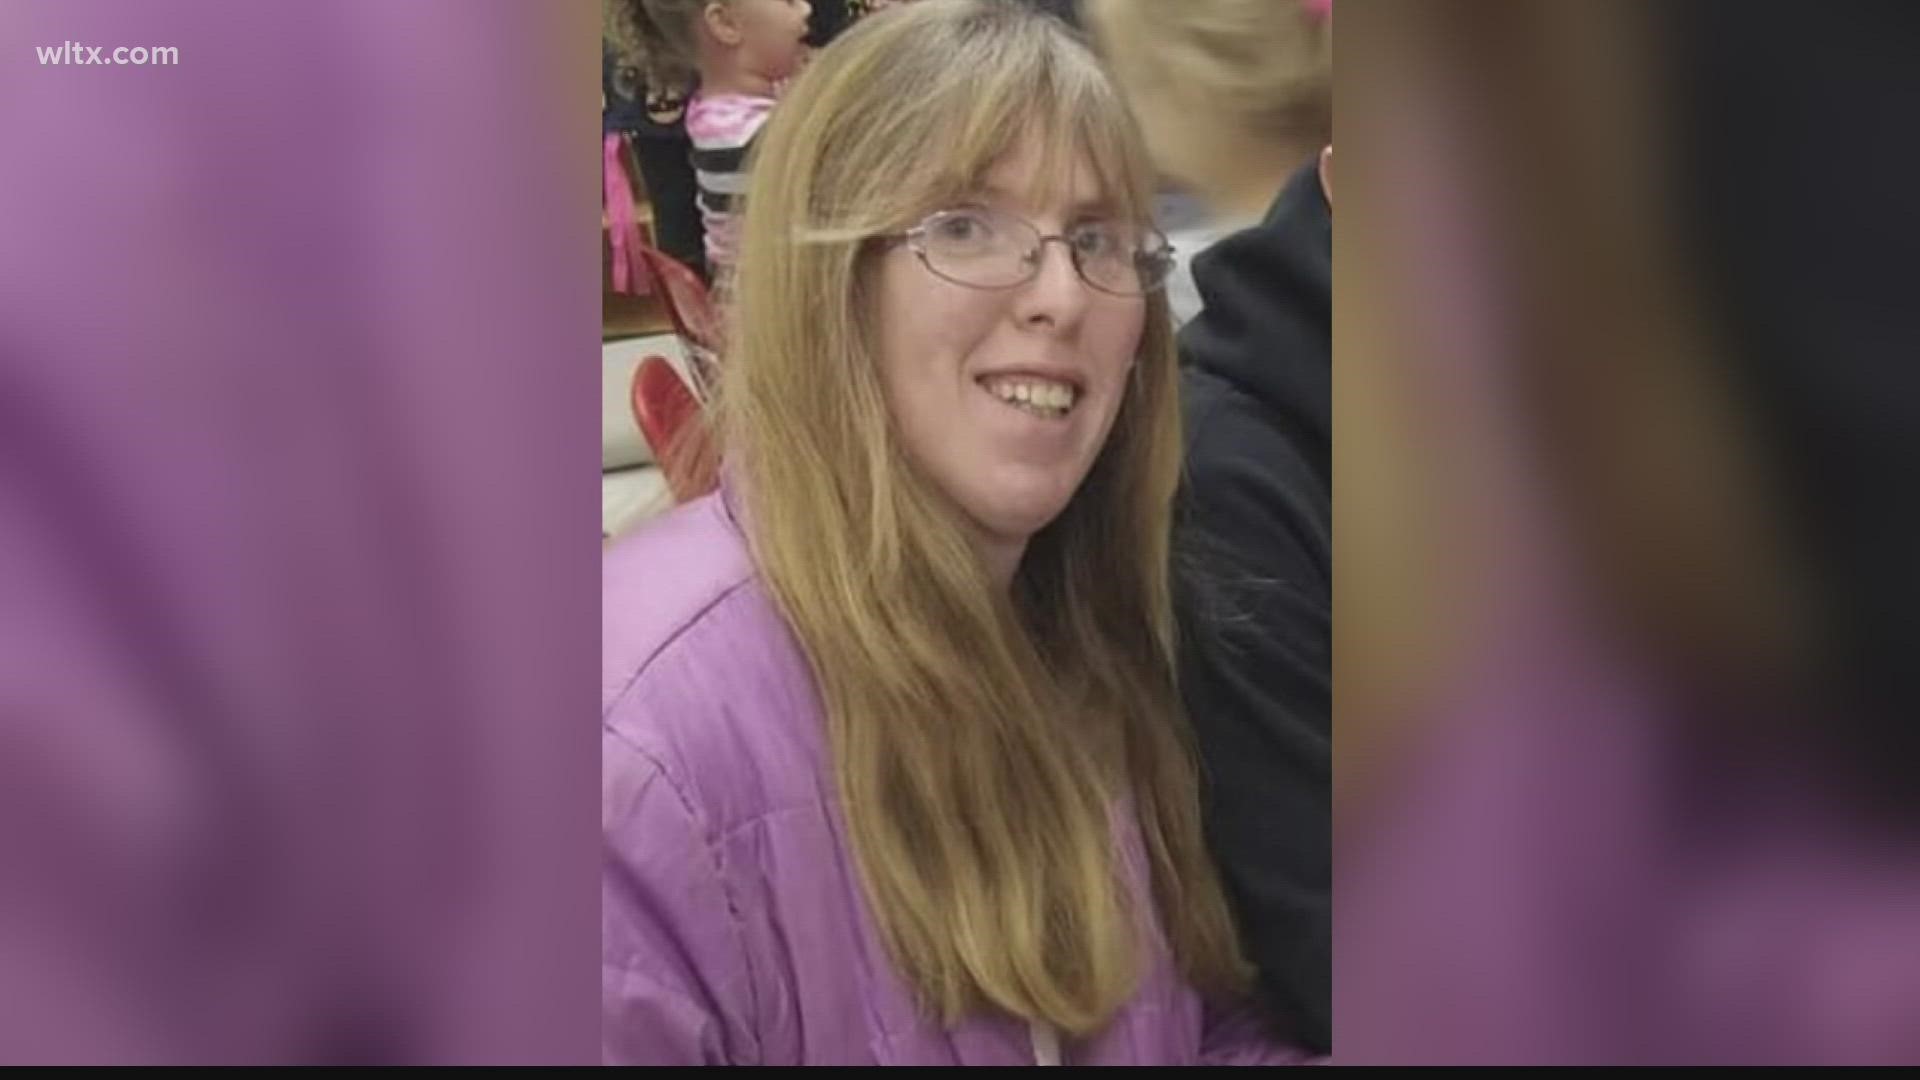 Officials say 41-year-old Donna Gearhart had placed her child on a school bus. Moments later, she was struck by a car while crossing the road.